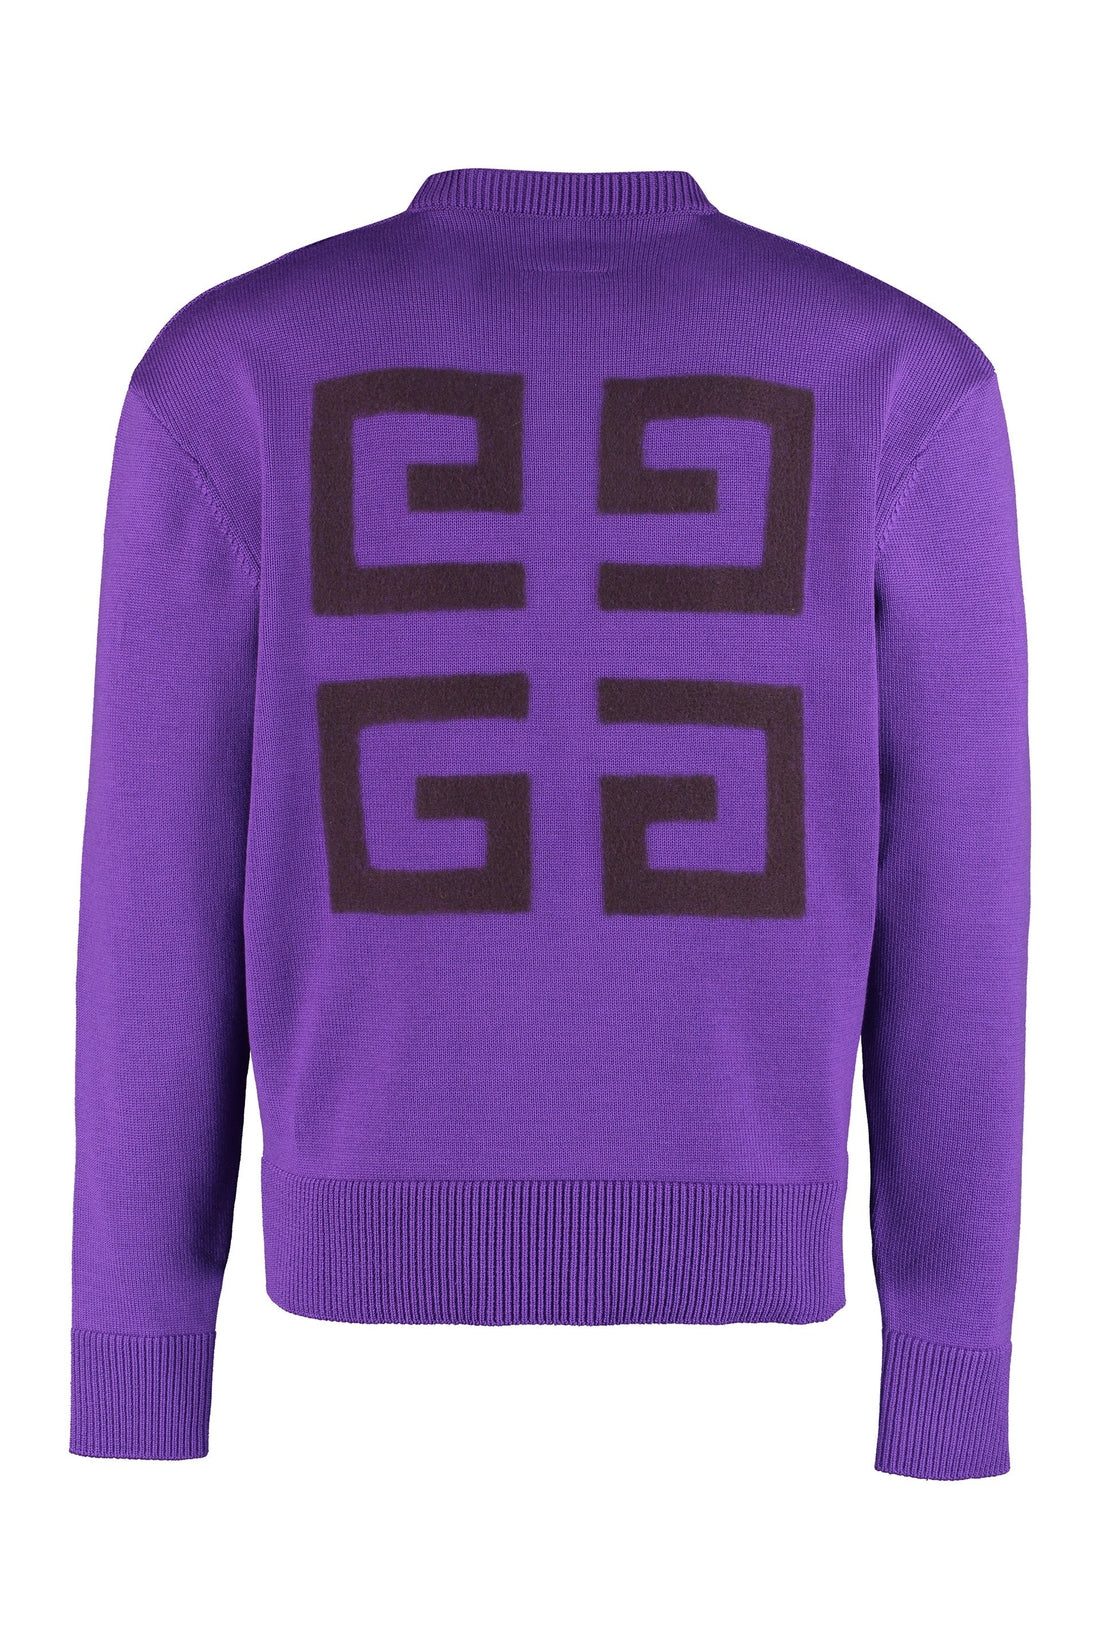 Givenchy-OUTLET-SALE-Wool pullover-ARCHIVIST